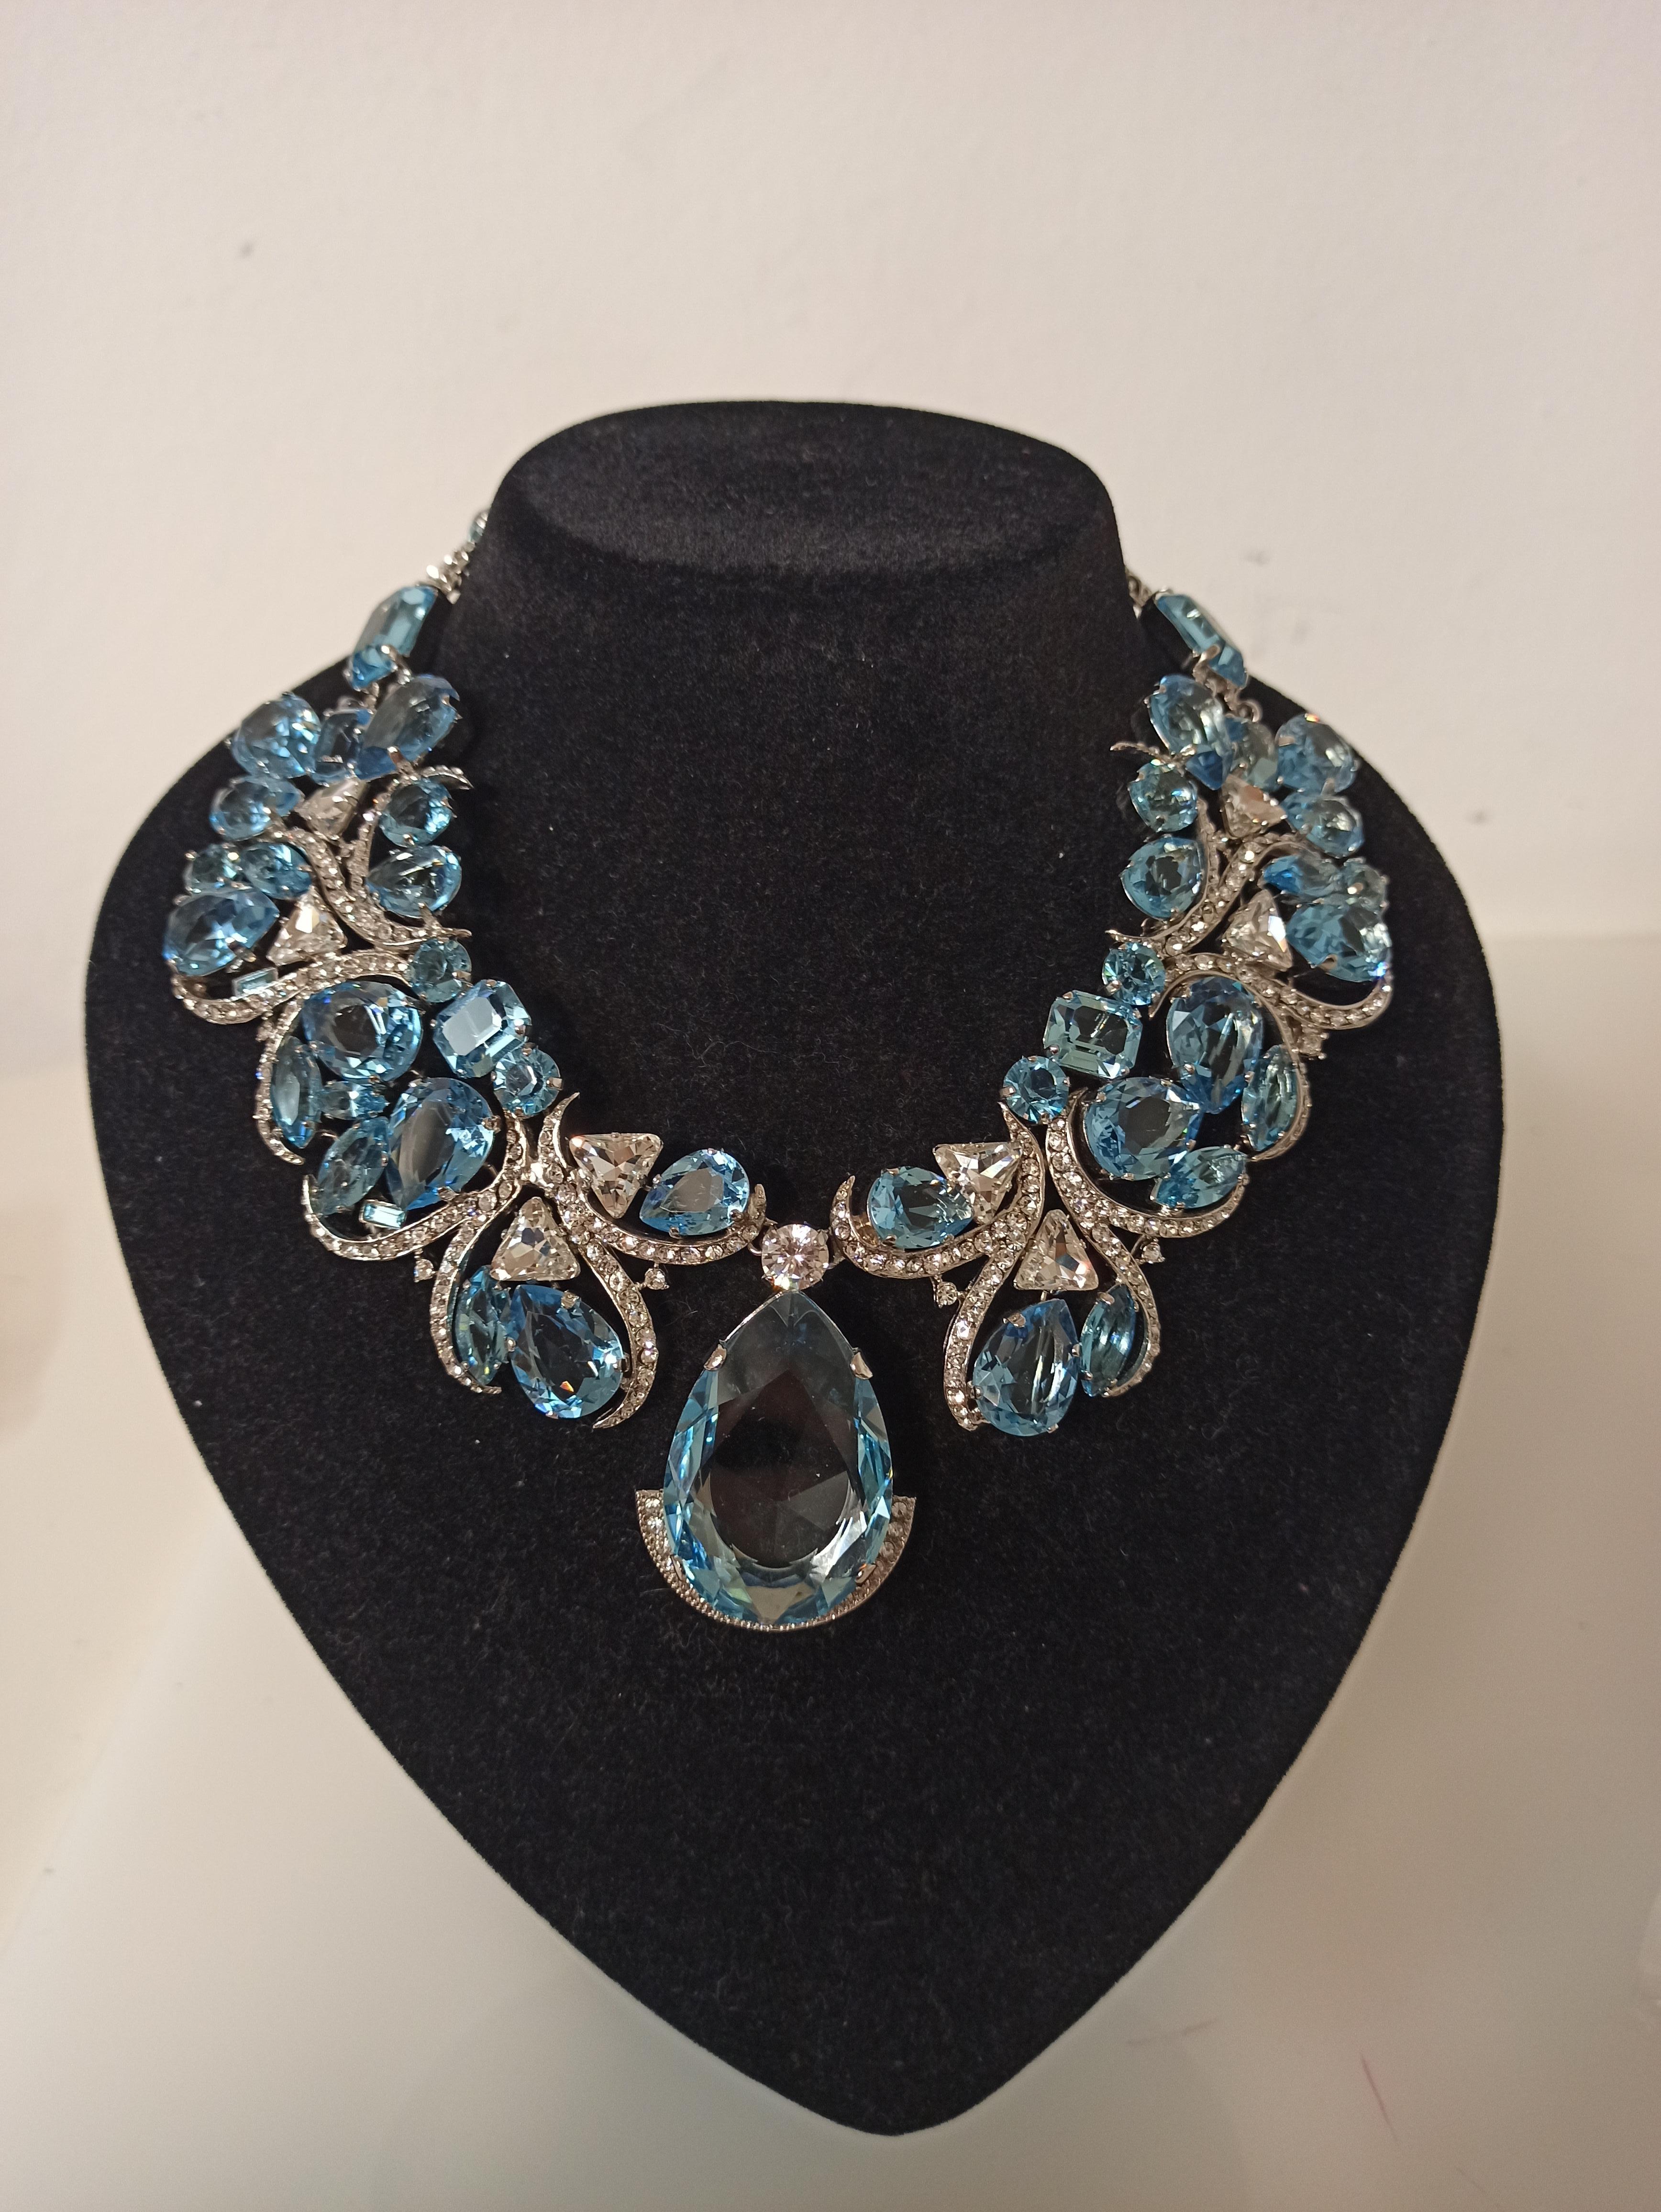 Fantastic piece by Carlo Zini
One of the world greatest bijoux designers
Non allergenic rhodium
Amazing hand application of swarovski crystals
Aquamarine like crystals
100% Artisanal work
Made in Milano
Worldwide express shipping included in the